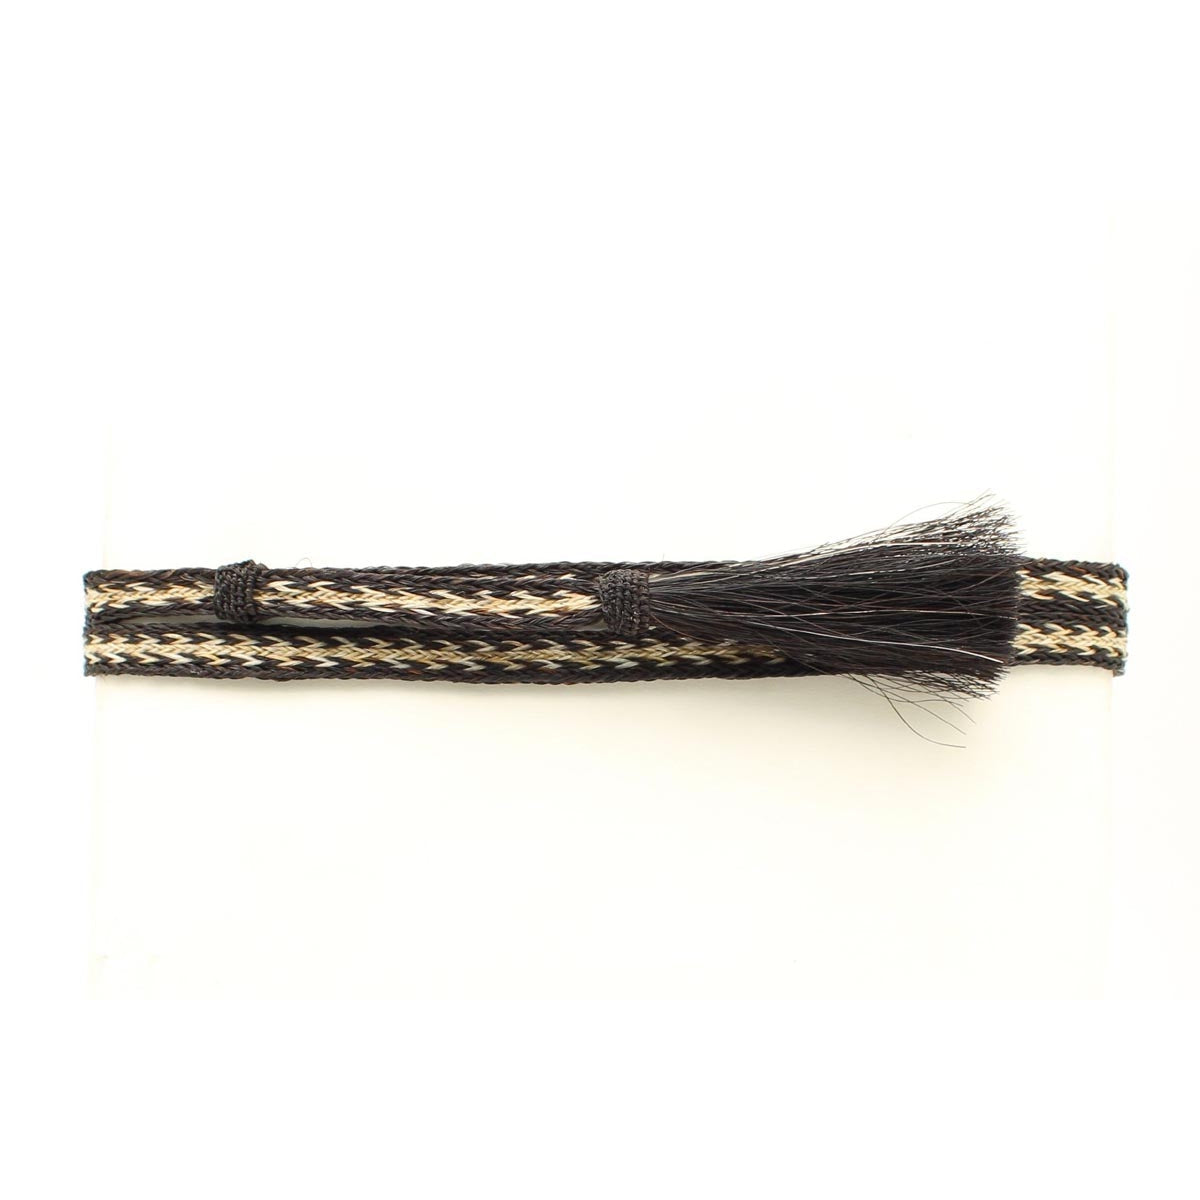 M&F 5-Strand Horsehair Hat Band - Natural